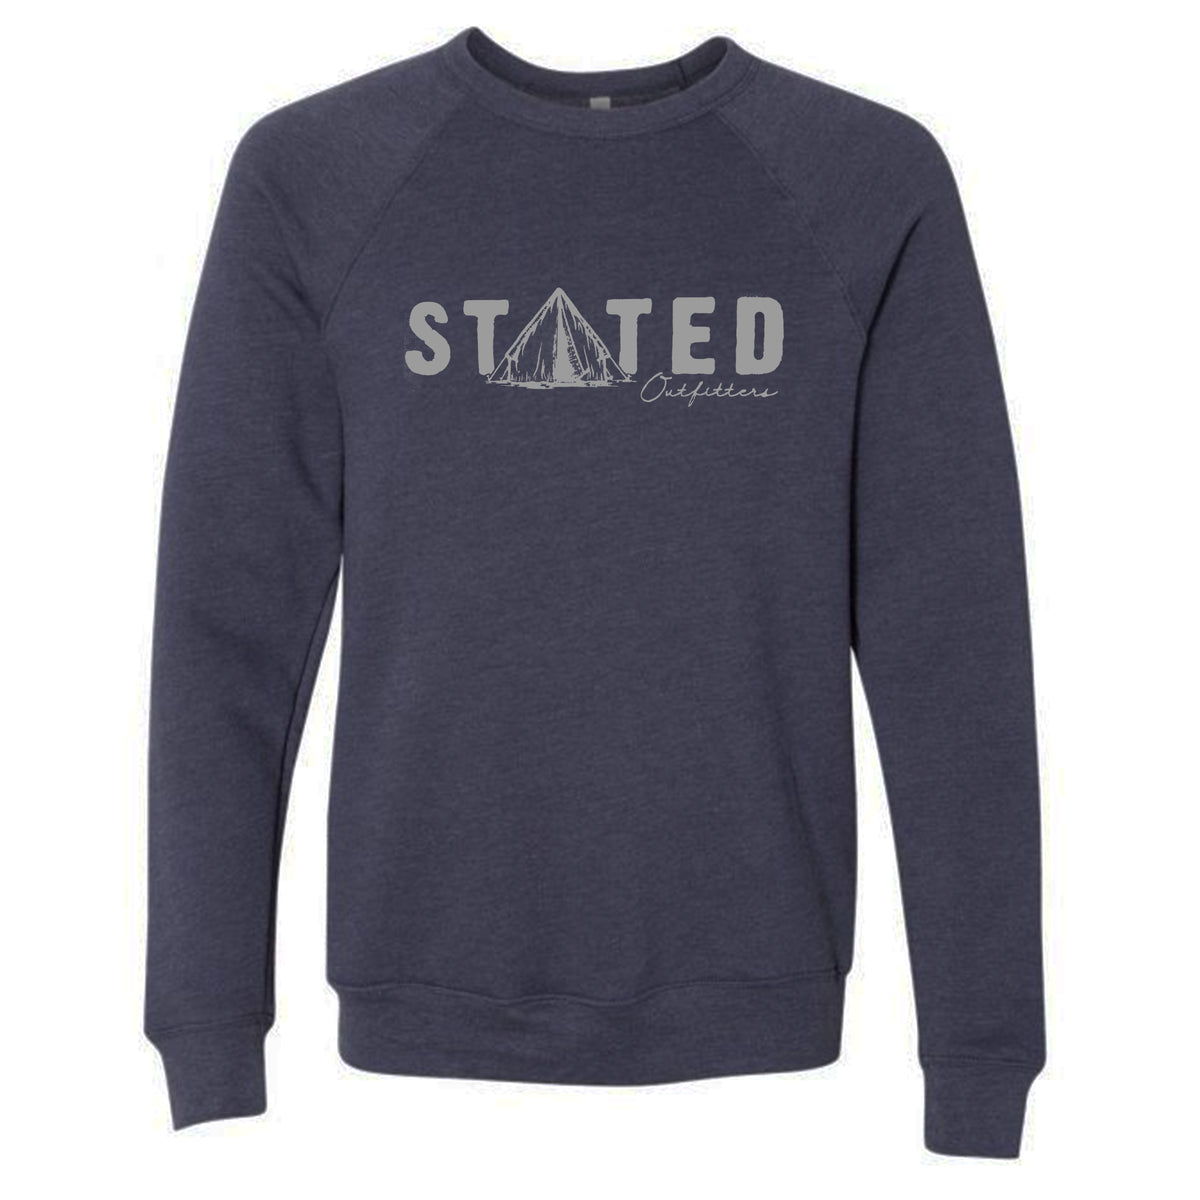 Stated Outfitters Tent Sweatshirt